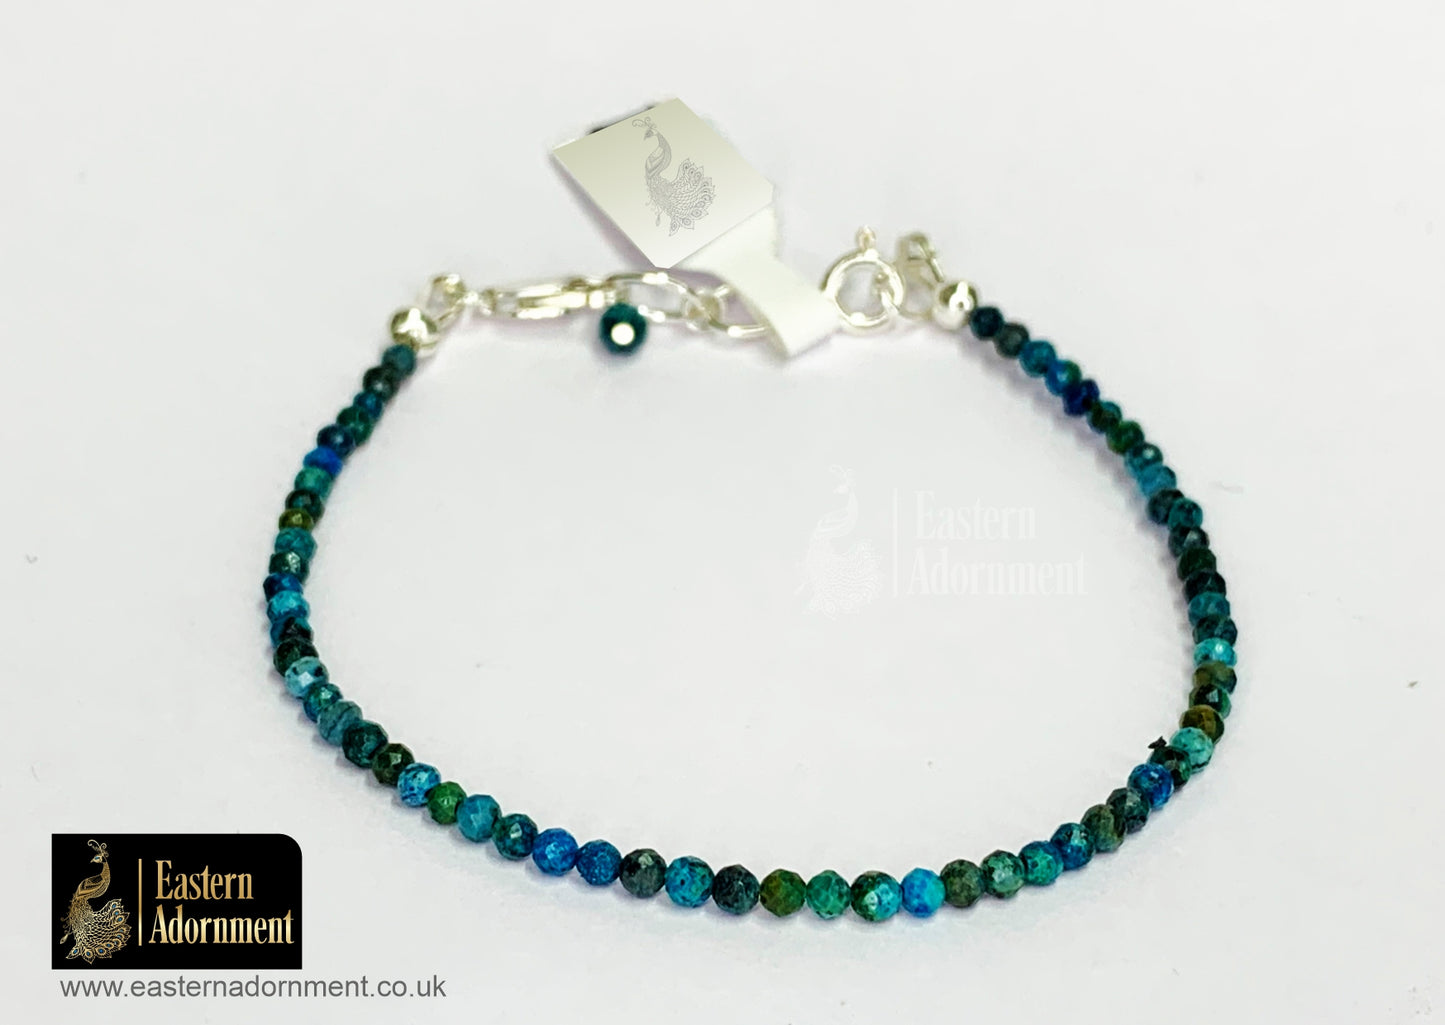 Chrysocolla Micro Cut Bead Bracelet with Silver Charm Clasp